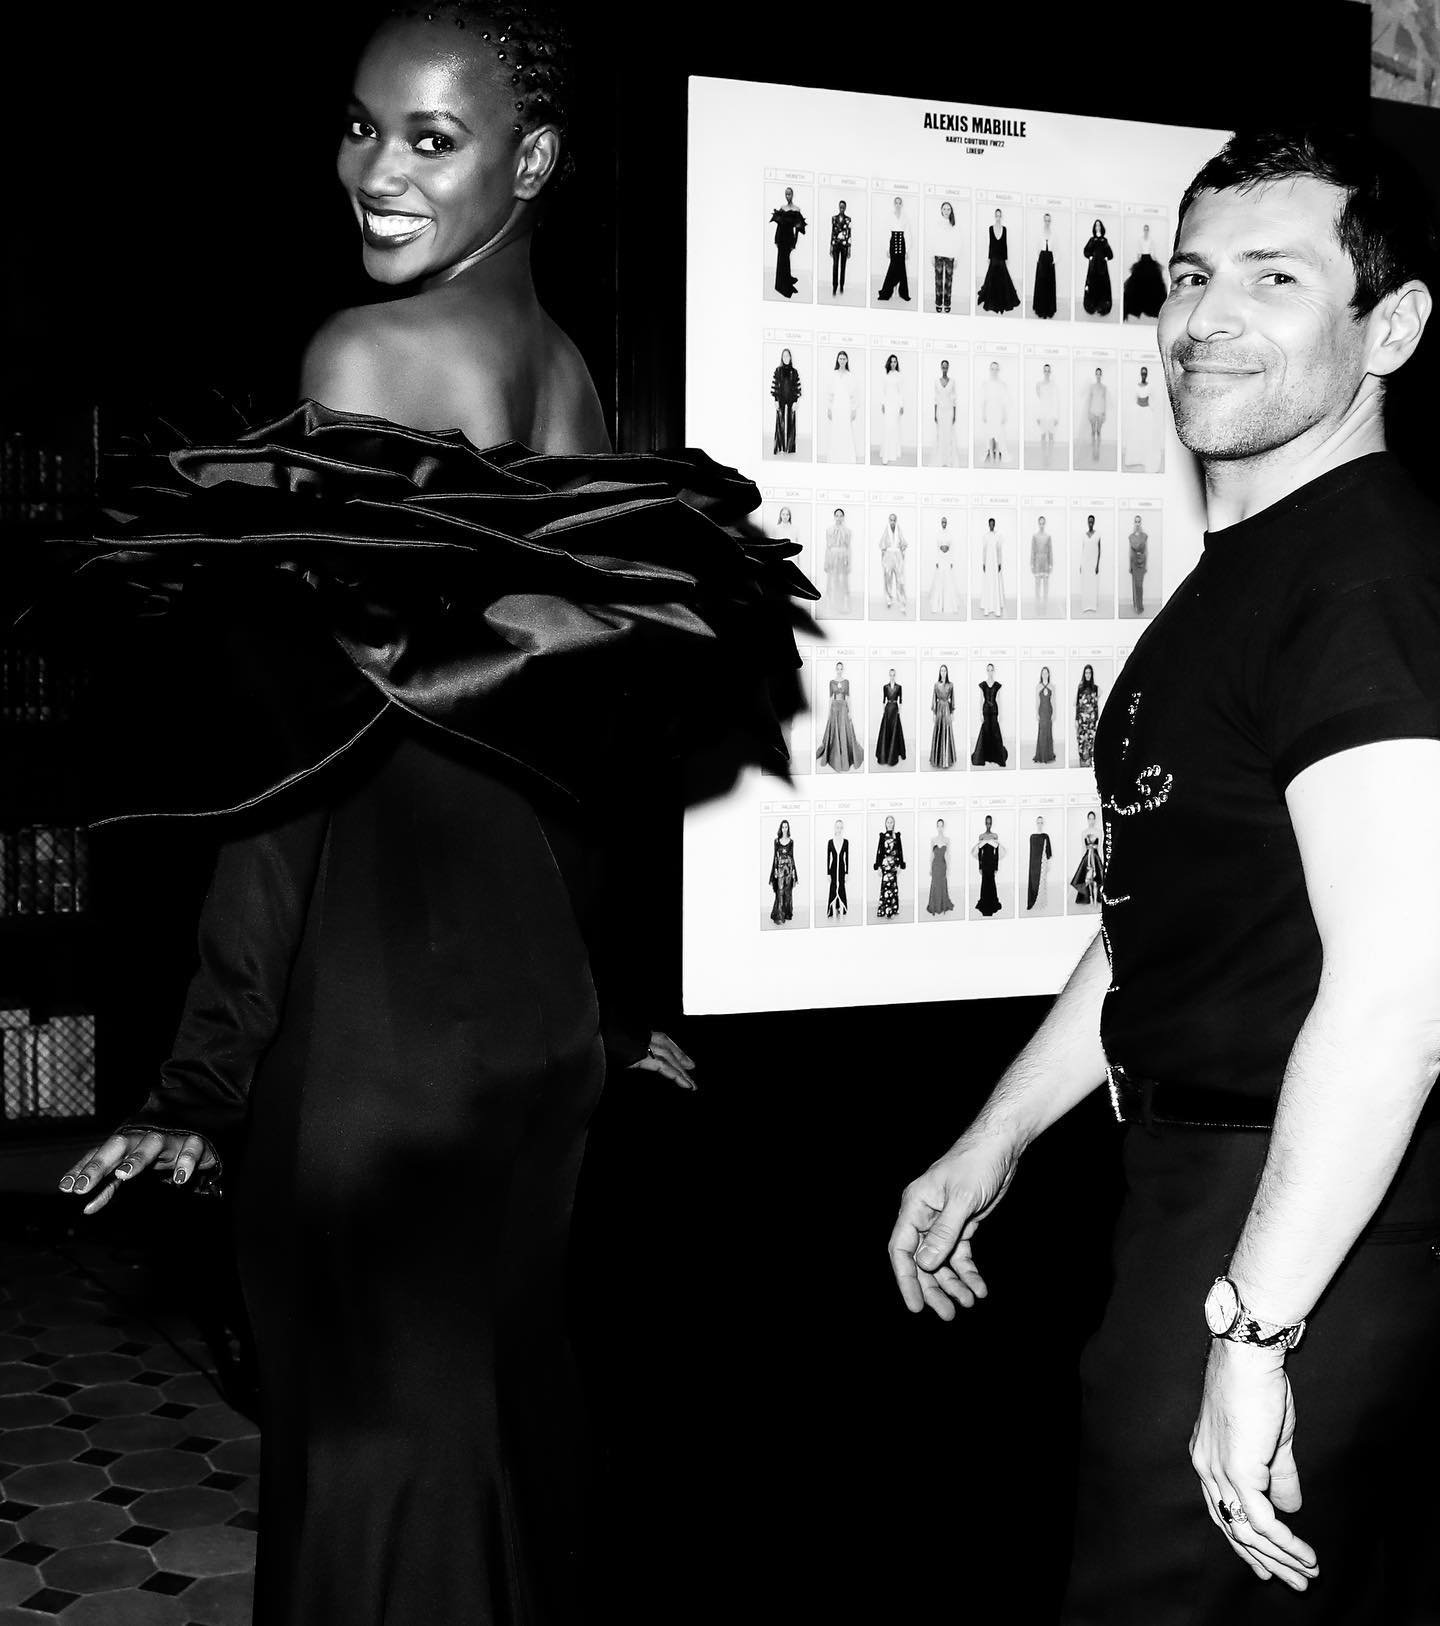 Happy time backstage captured by @francoisgoize with me and @heriethpaul #backstage #lineup #showtime #black&amp;white @alexismabille #alexismabille